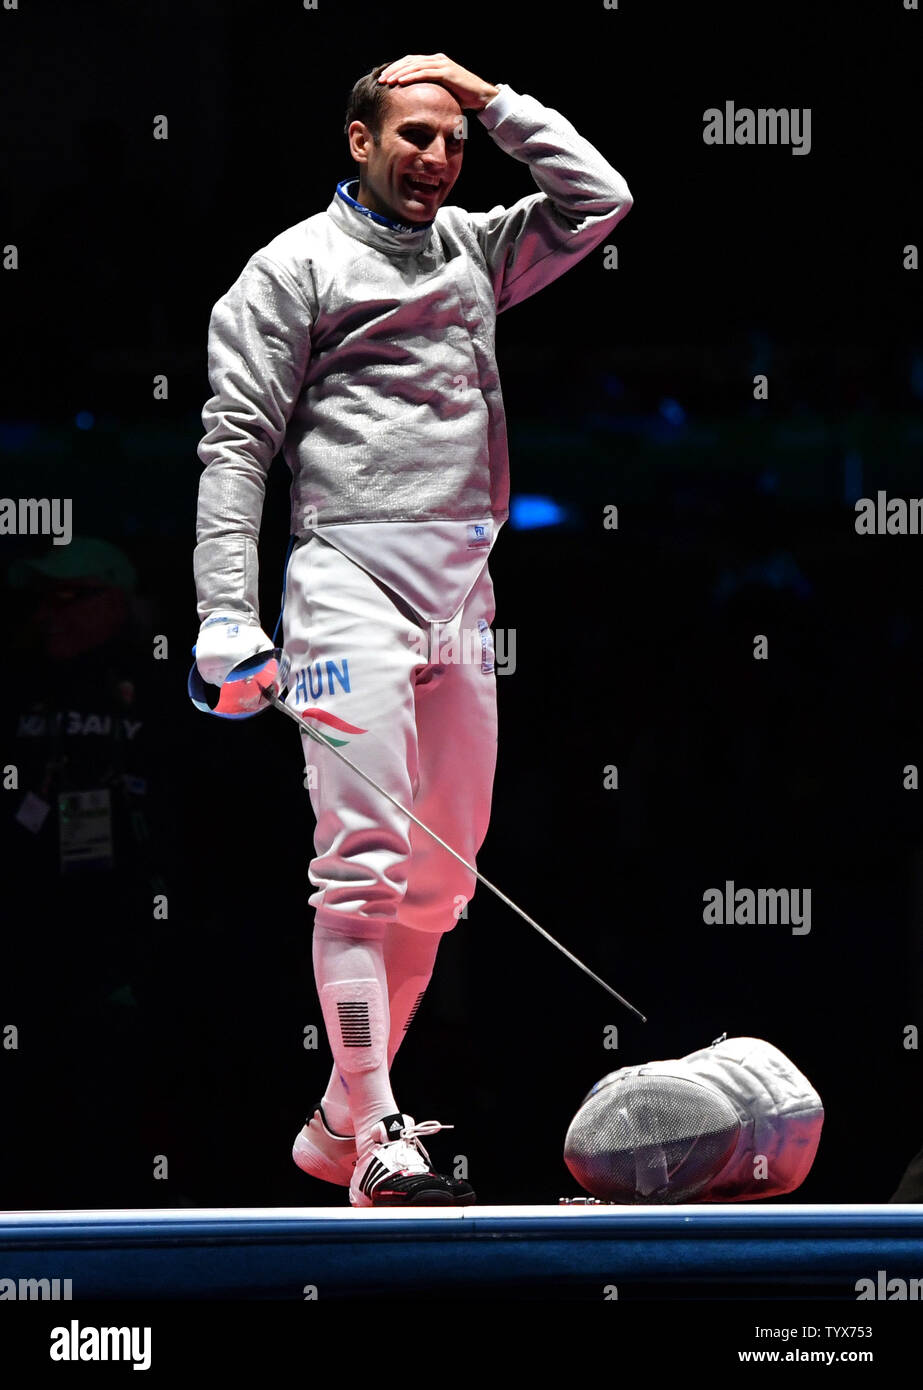 Hungarian Aron Szilagyi Reacts After Defeating American Daryl Homer To Win Gold In The Final Of The Men S Fencing Individual Saber At The 2016 Rio Summer Olympics In Rio De Janeiro Brazil